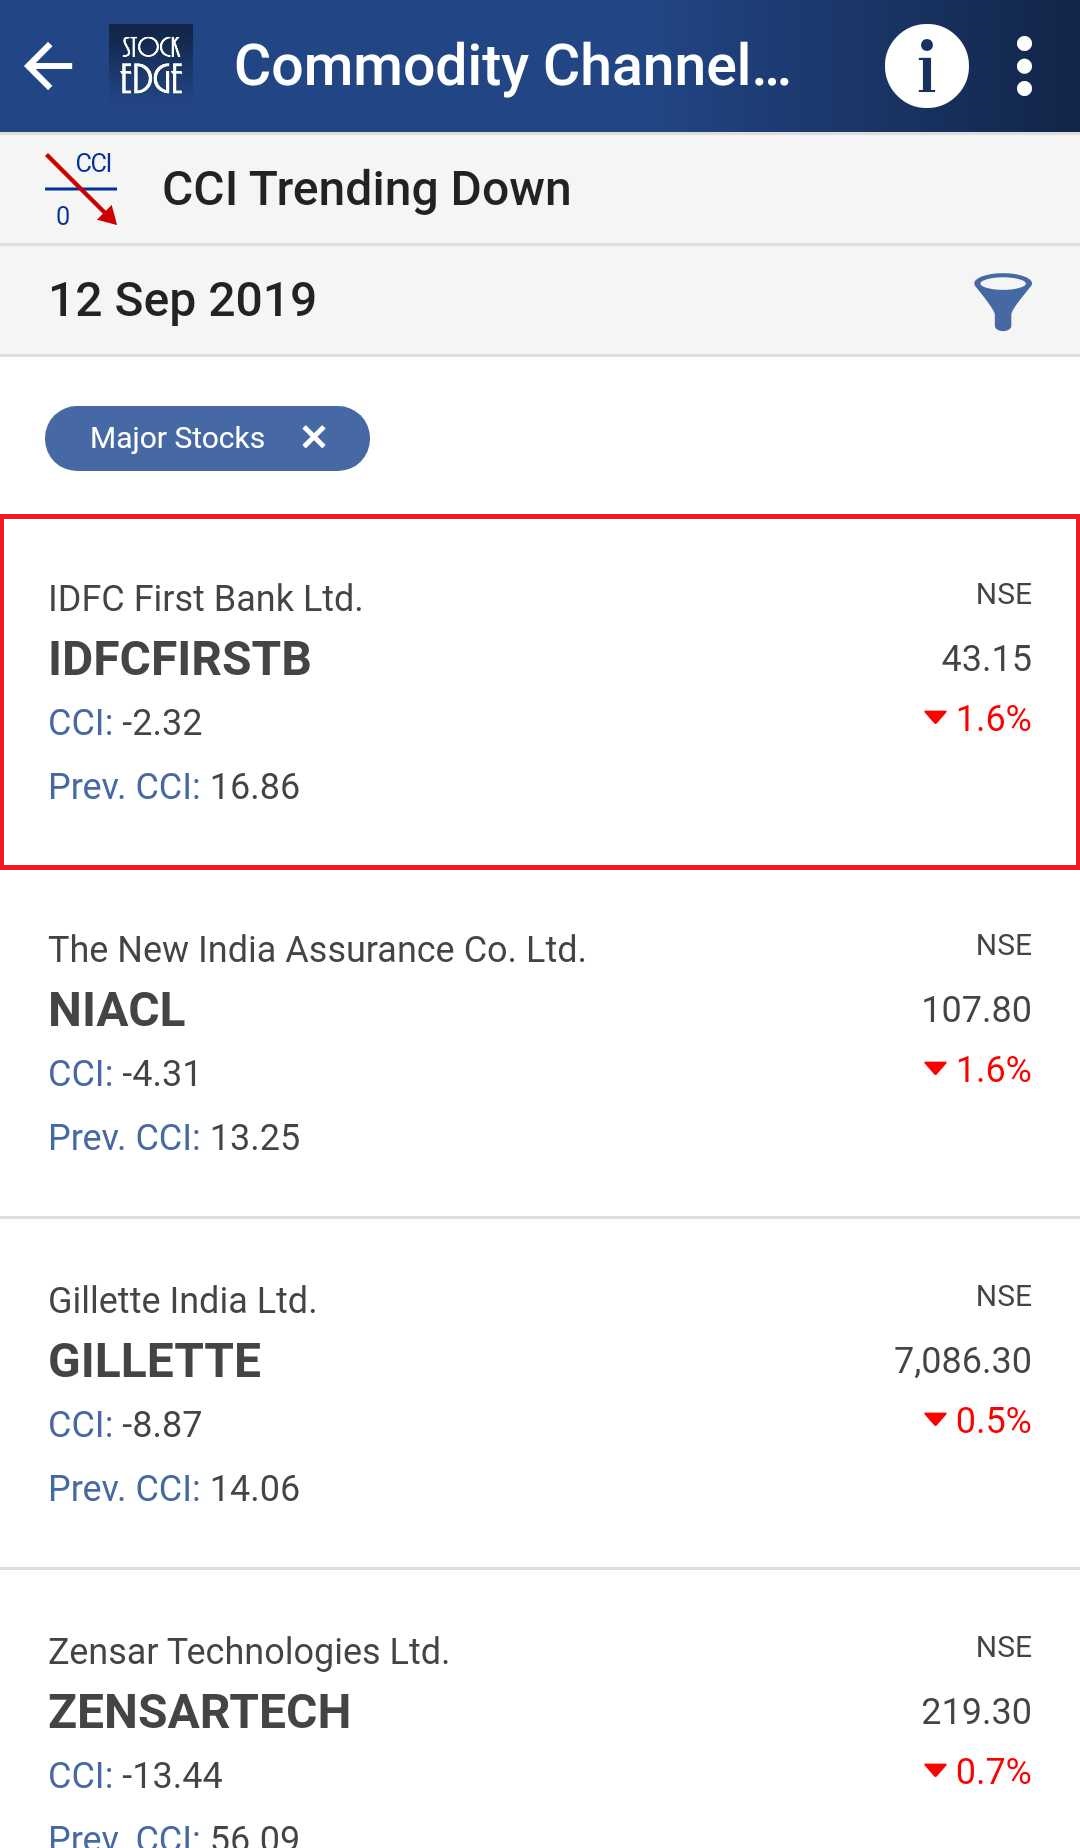 A list of cci of various stocks trending downwards as of 12 sep,2019.